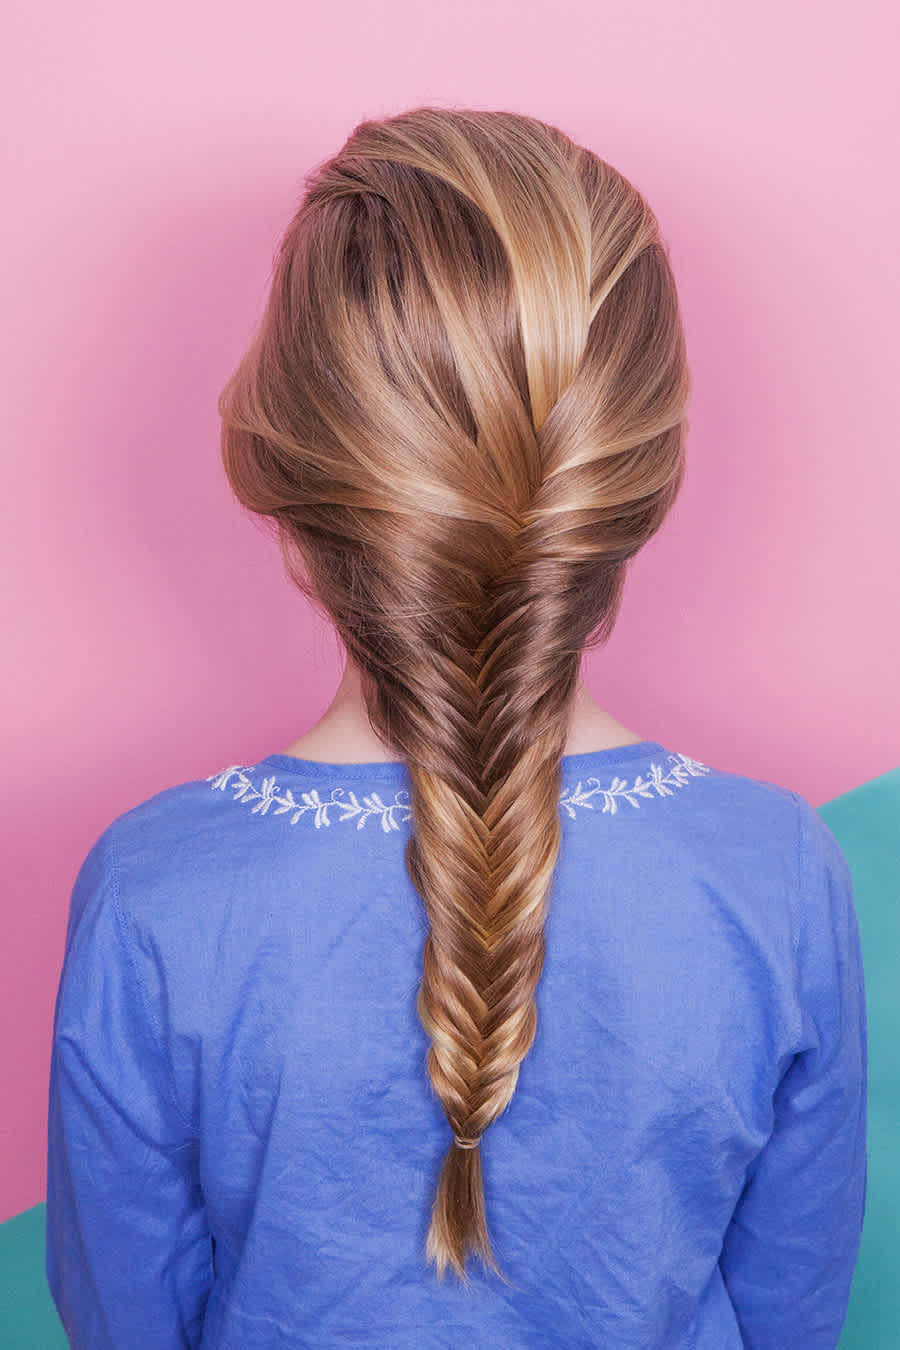 Fishtail hairstyle